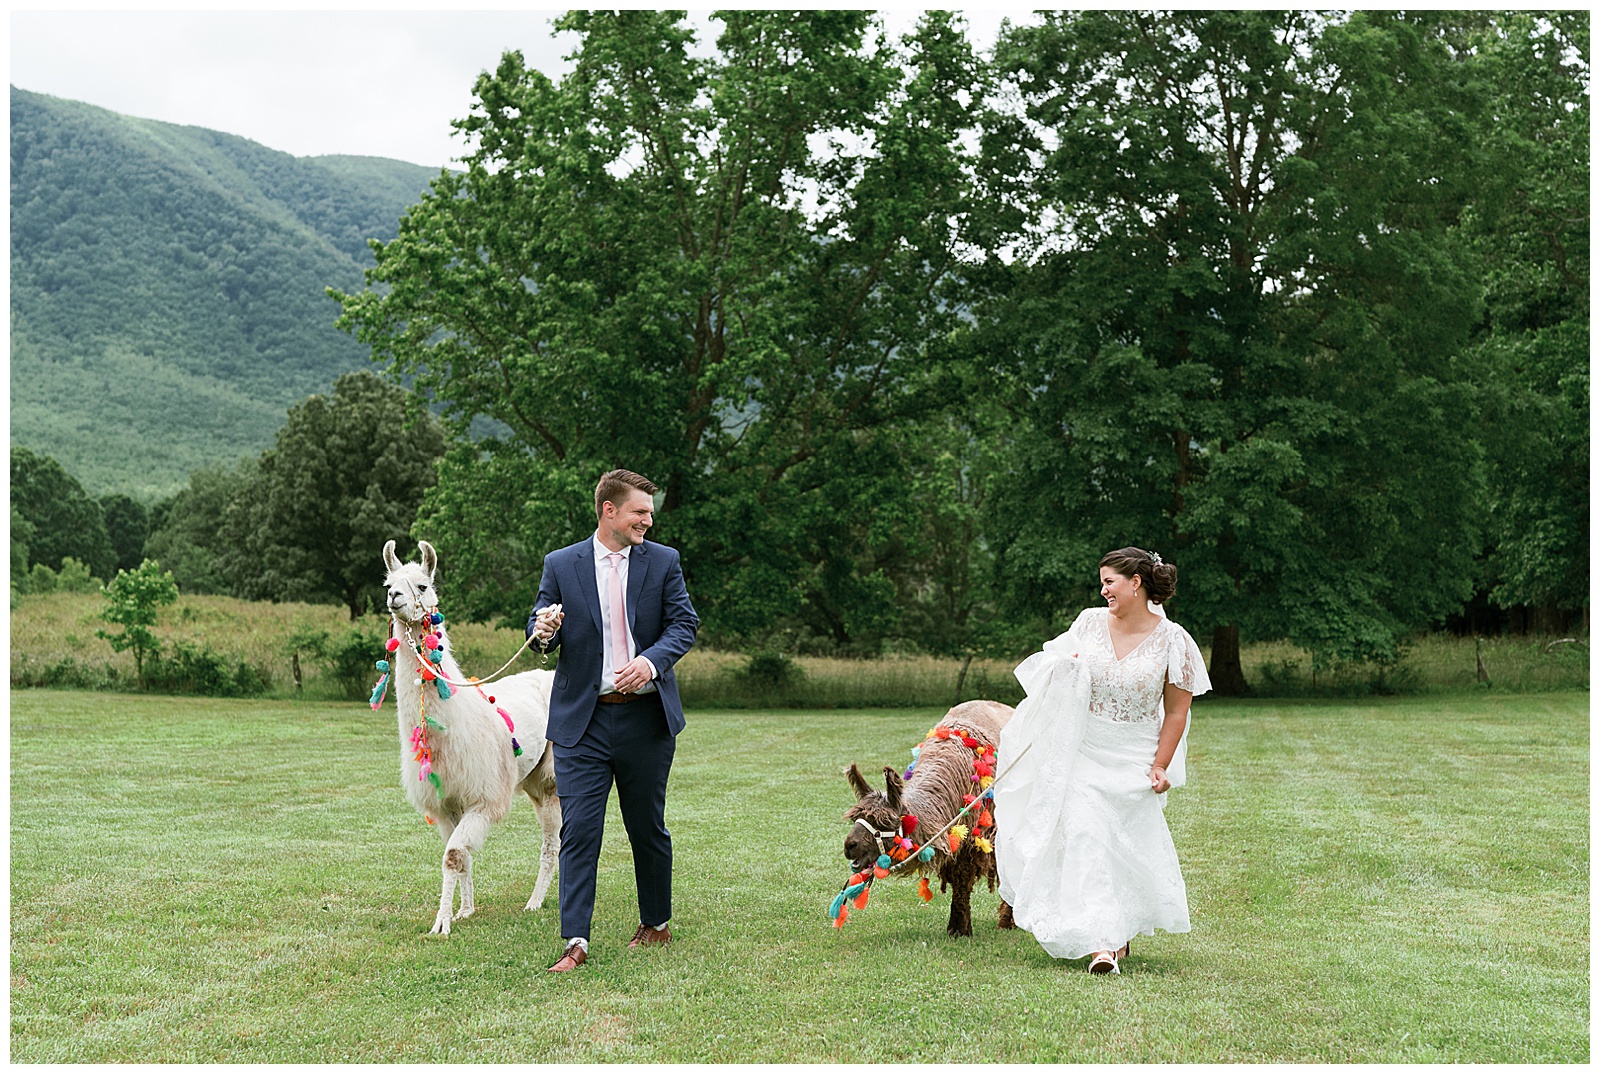 small intimate wedding in the countryside of East Tennessee. Photos by Holly Michon Photography